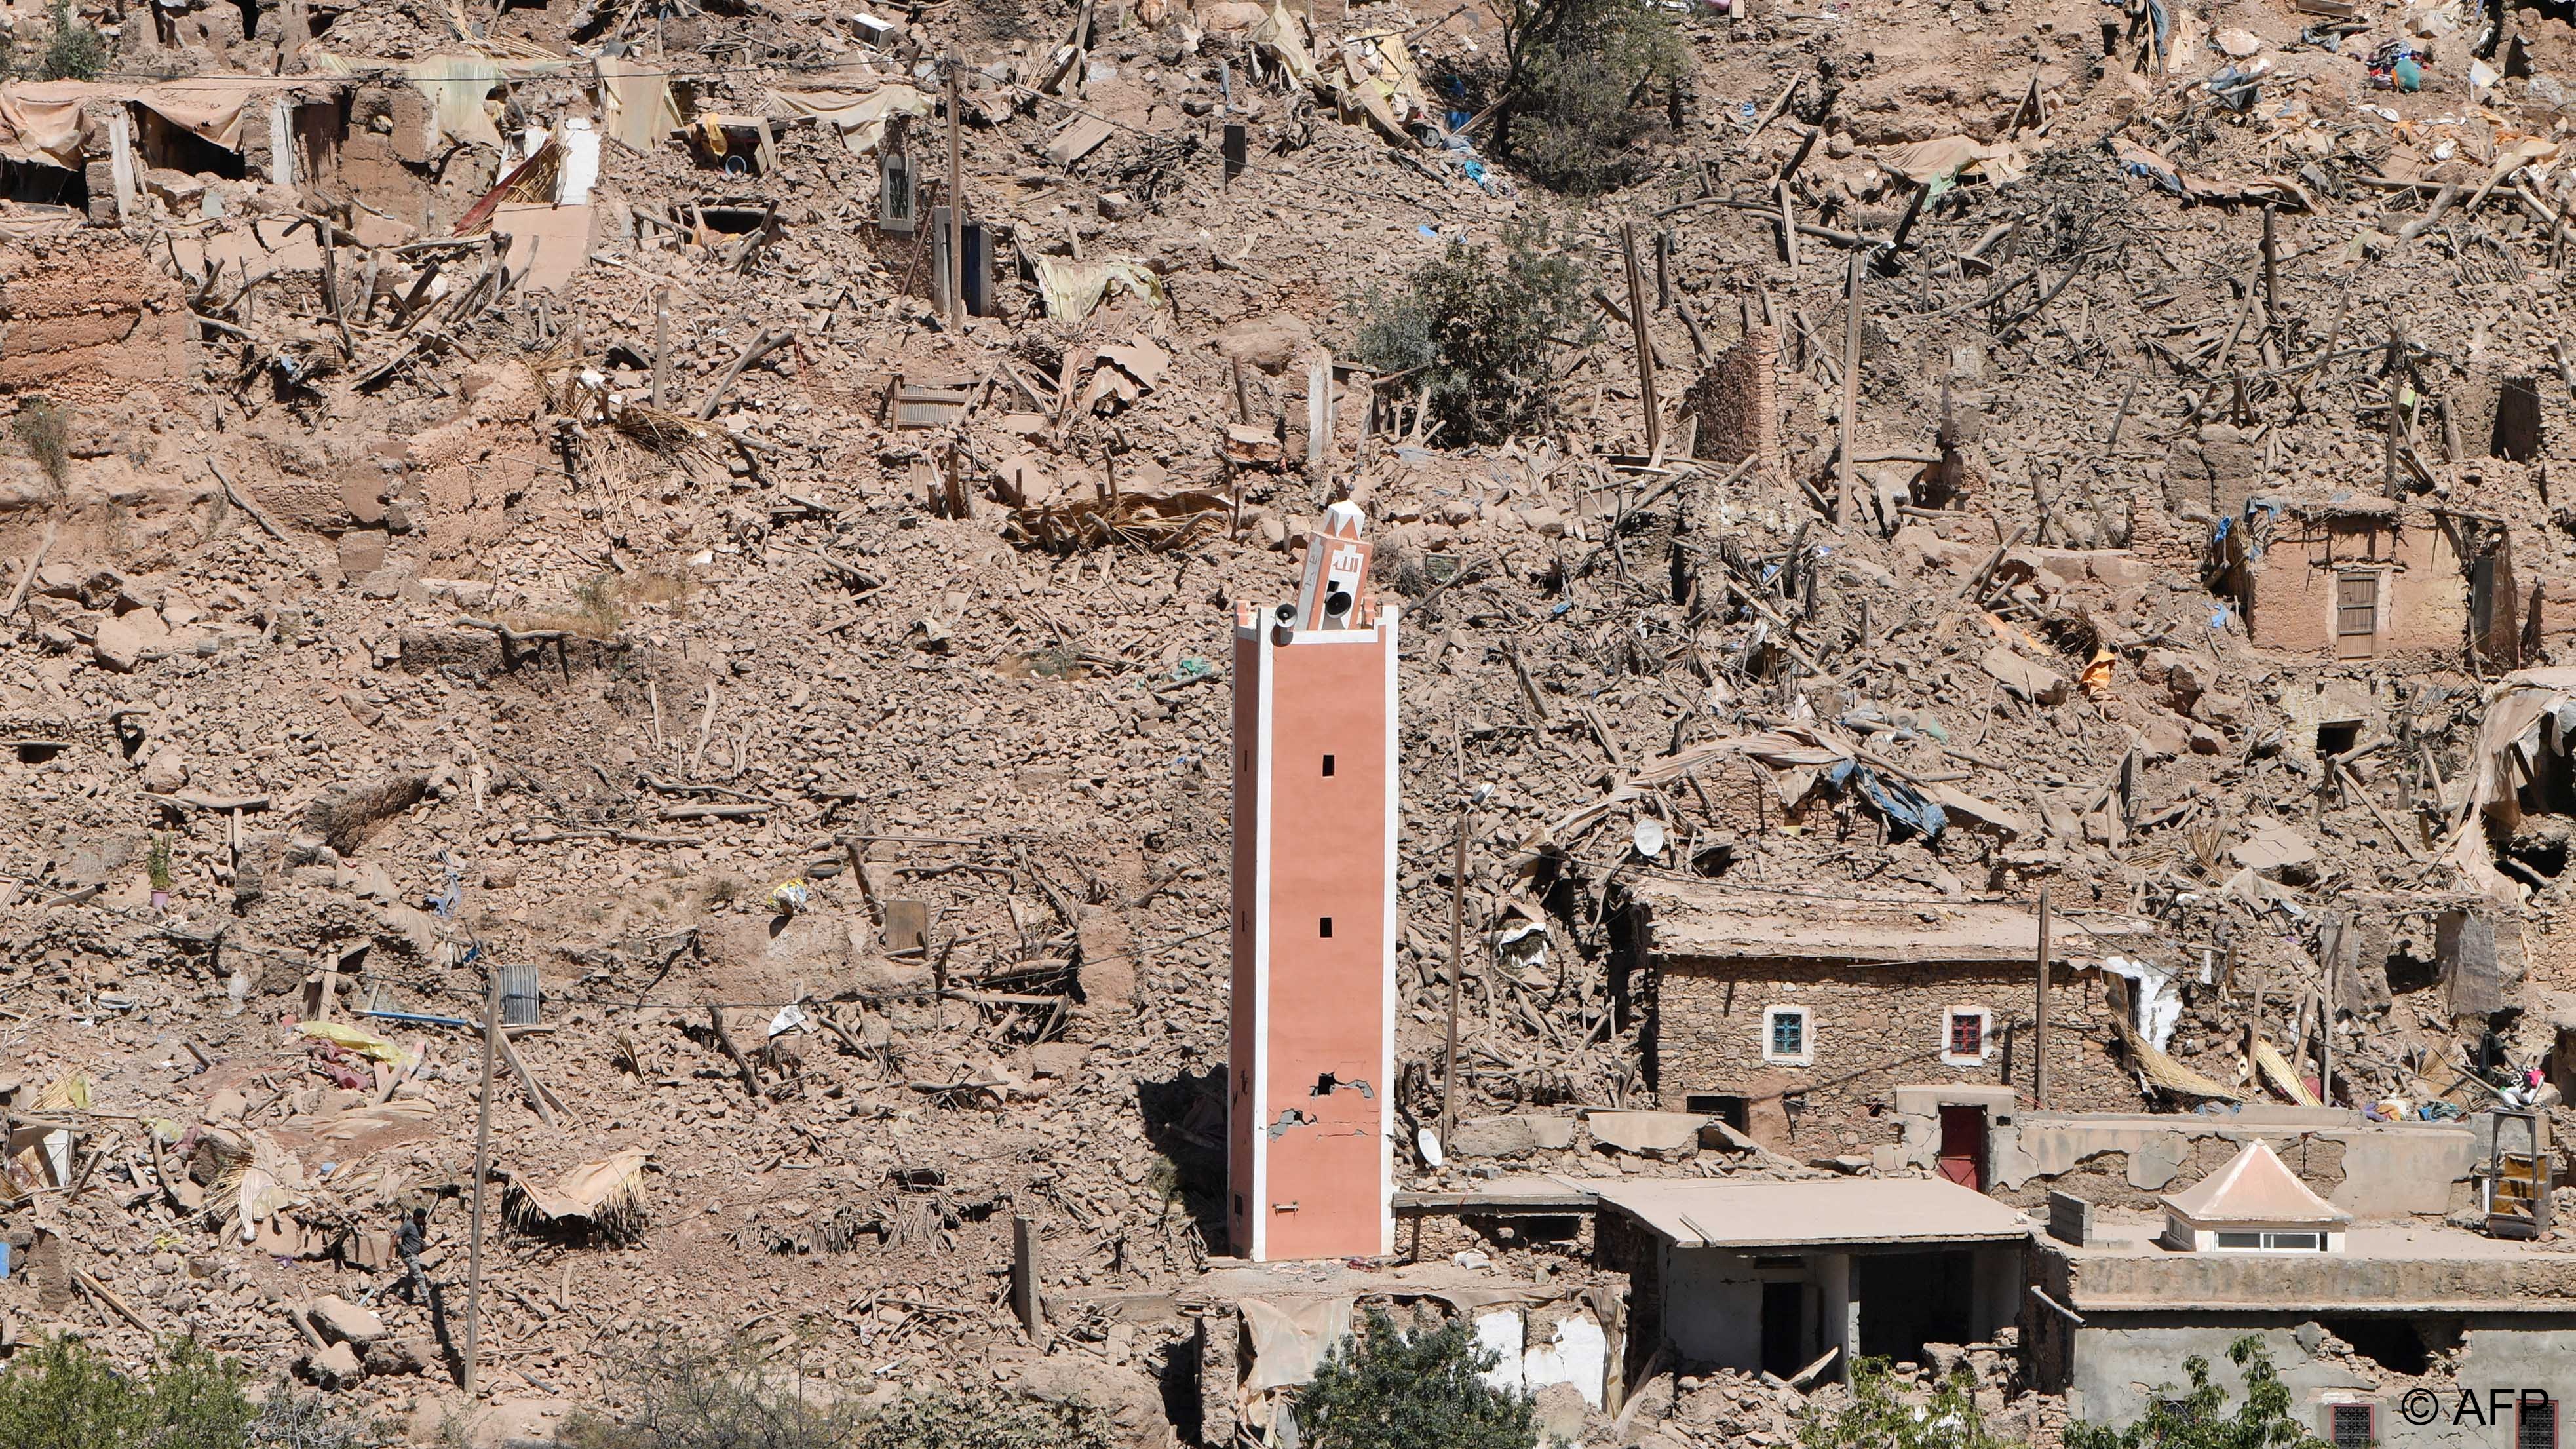 The village of Tikht saw most of its homes flattened in Morocco's earthquake.